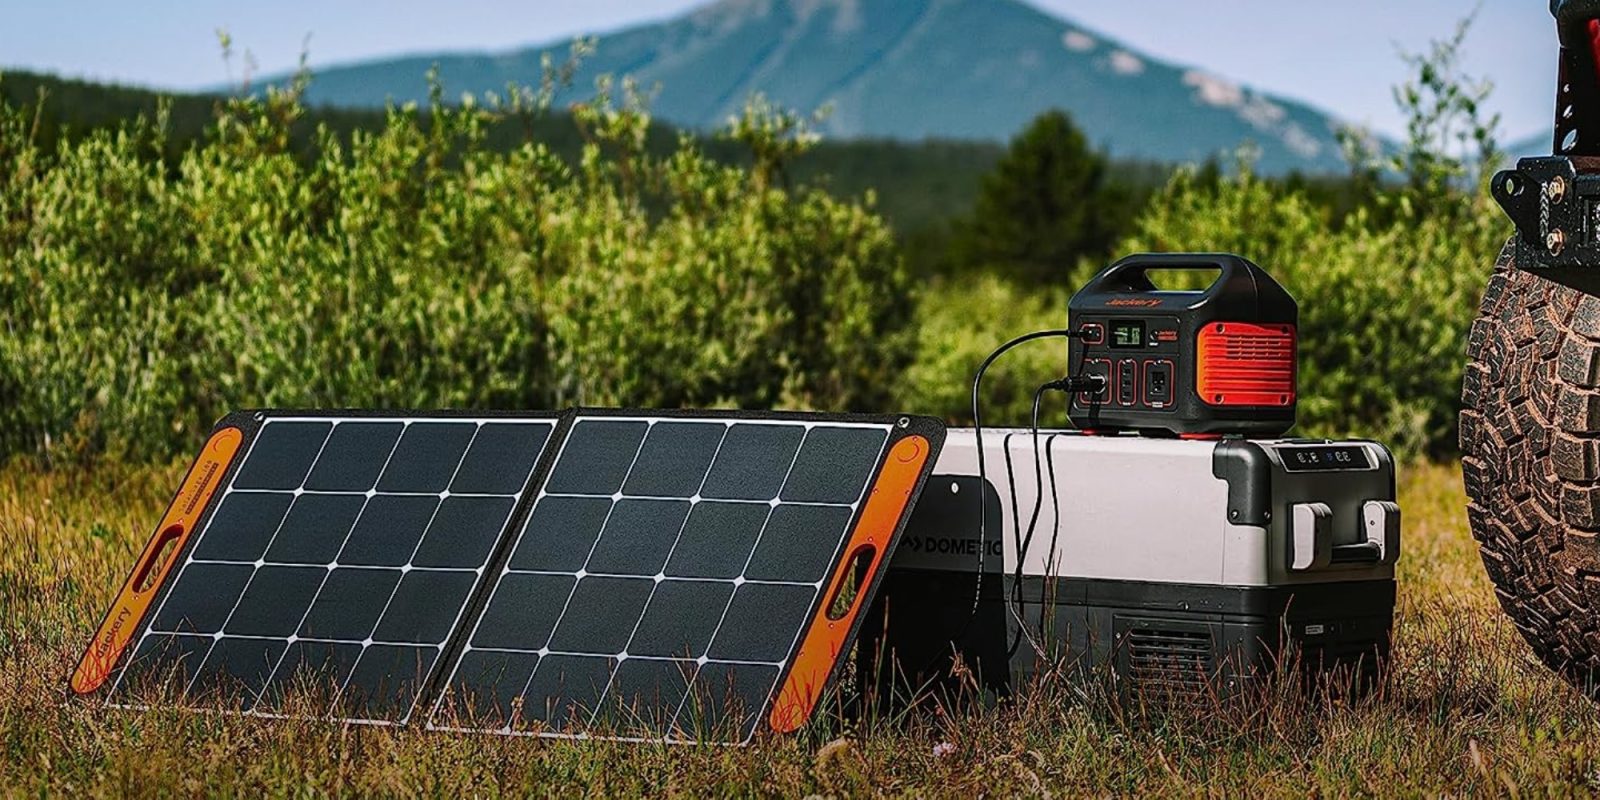 jackery’s explorer 500 solar power station now $150 off in new green deals, matter smart plugs, more